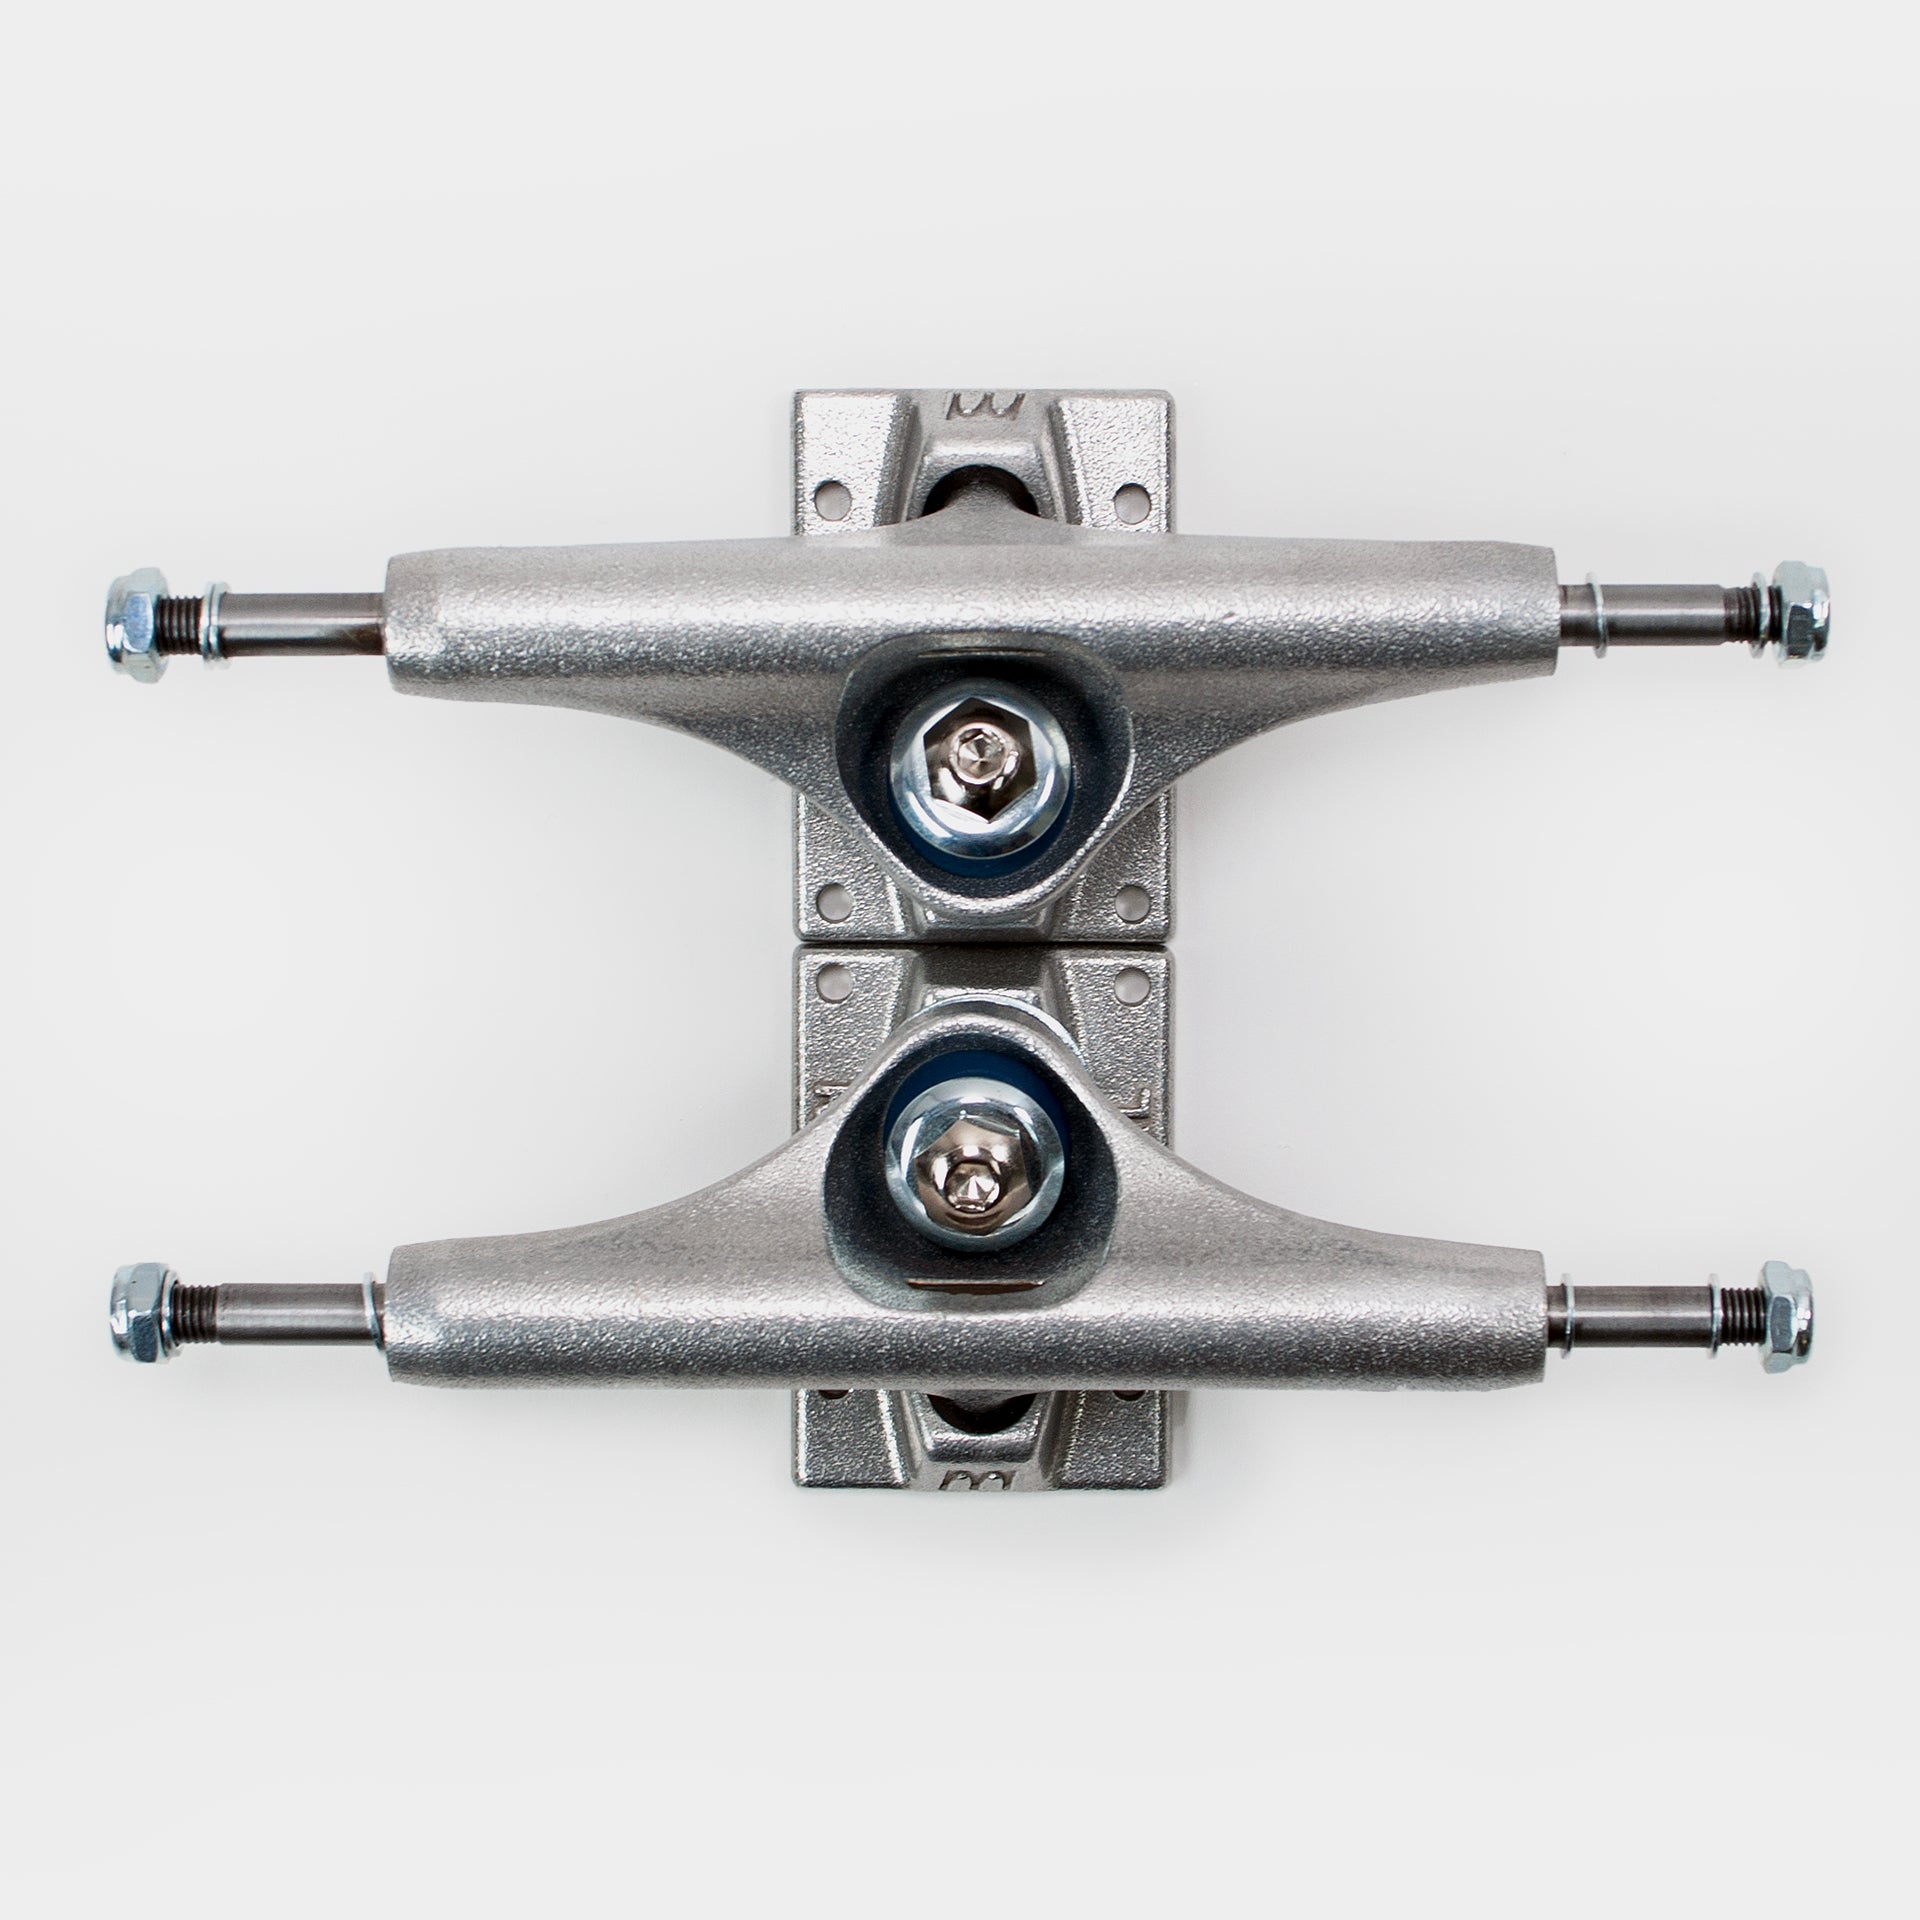 Royal FC Inverted Kingpin Raw Truck 149 (8.5") - Silver - (Sold as a pair) - Prime Delux Store